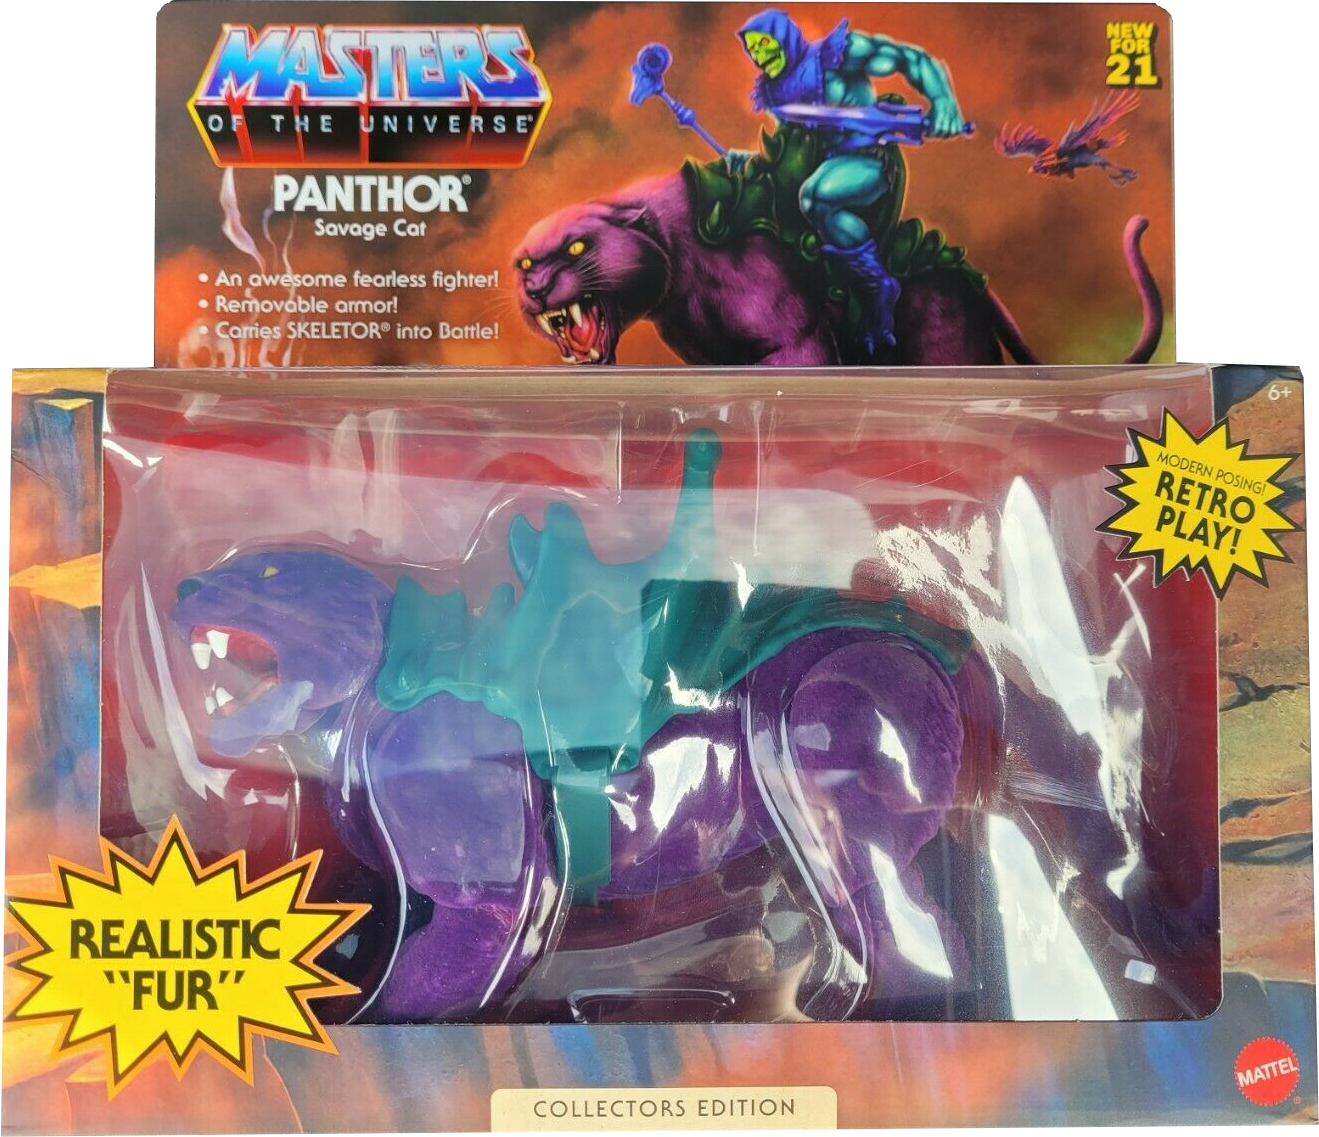 DOUBLE LOGO MEXICO EDITION MASTERS OF THE UNIVERSE ORIGINS FLOCKED PANTHOR MISB 